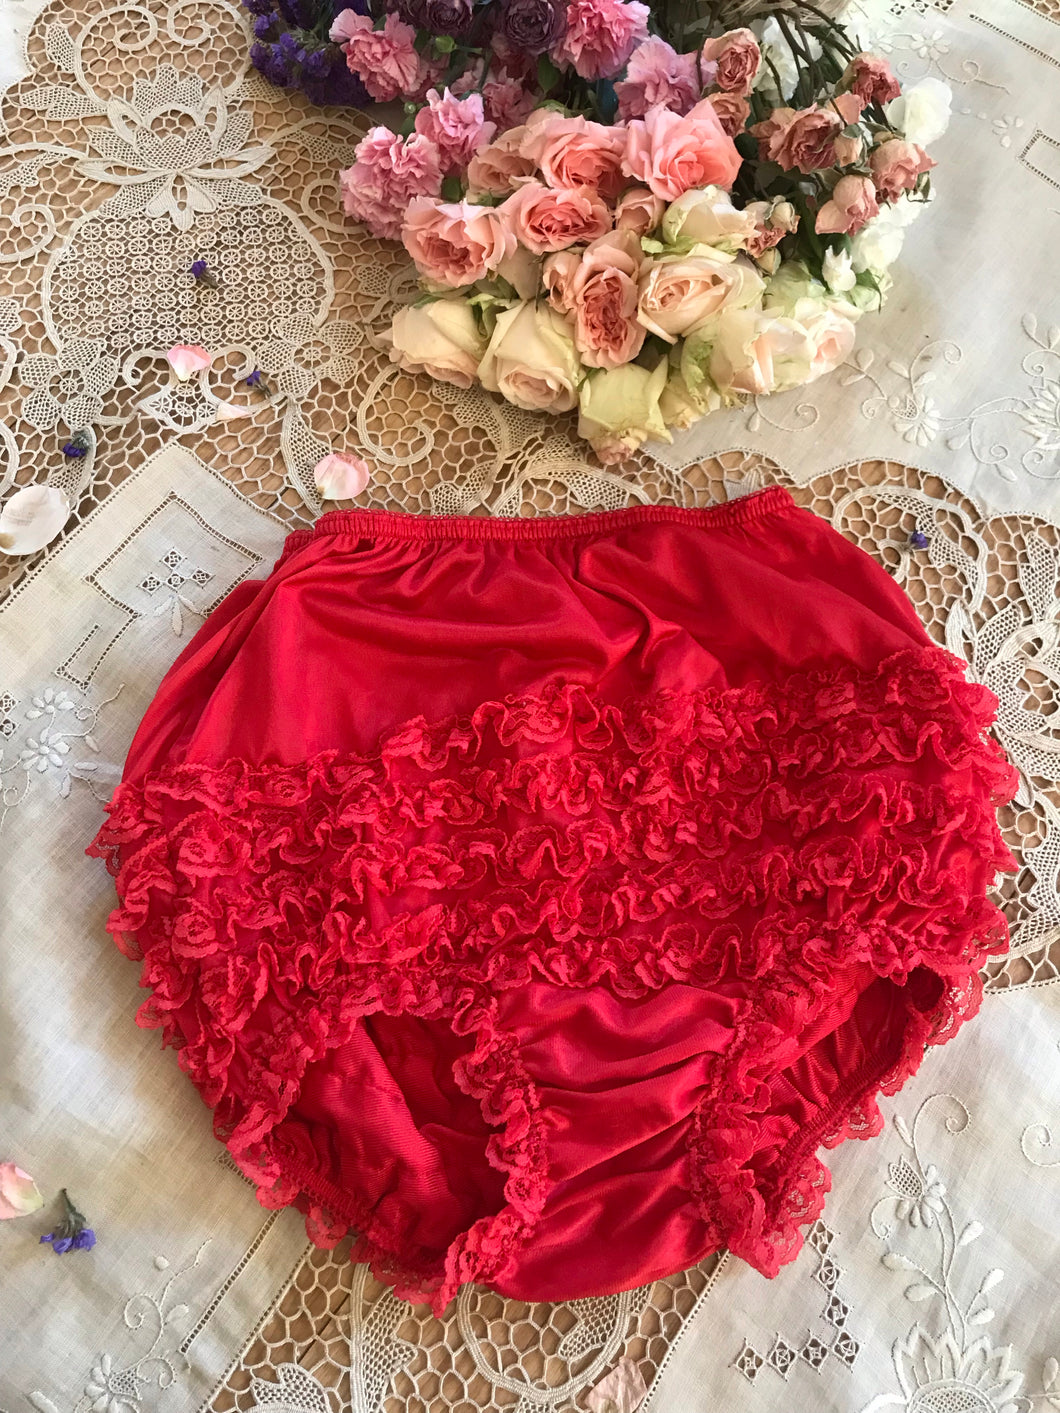 Authentic 1970’s vintage red ruffle panties by Fantasia